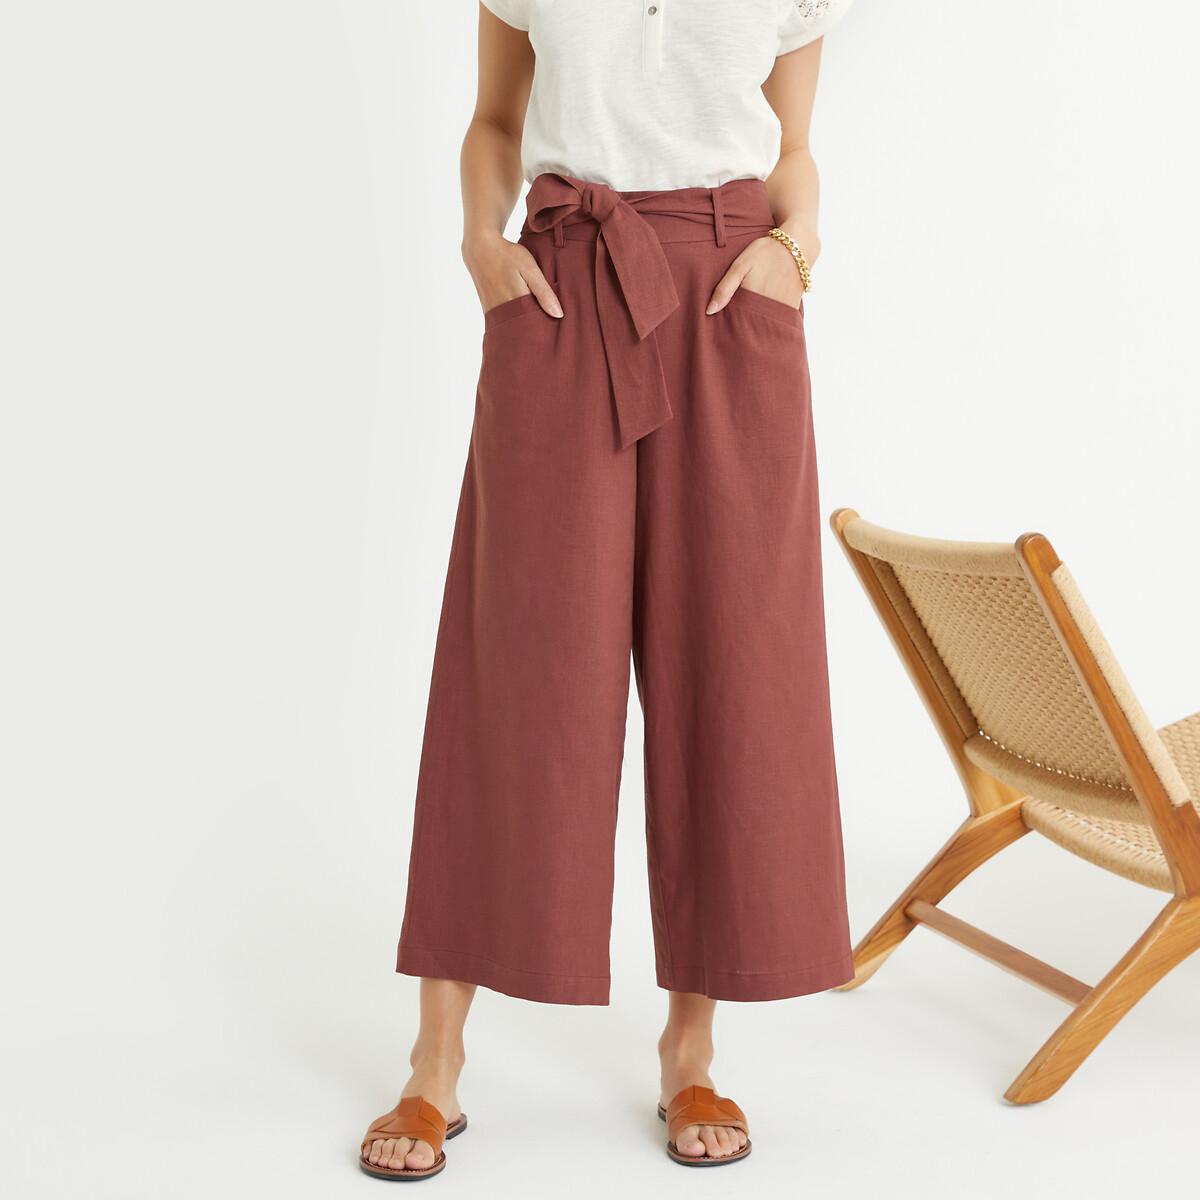 Image of Cropped Wide Leg Trousers in Cotton/Linen, Length 24.5"